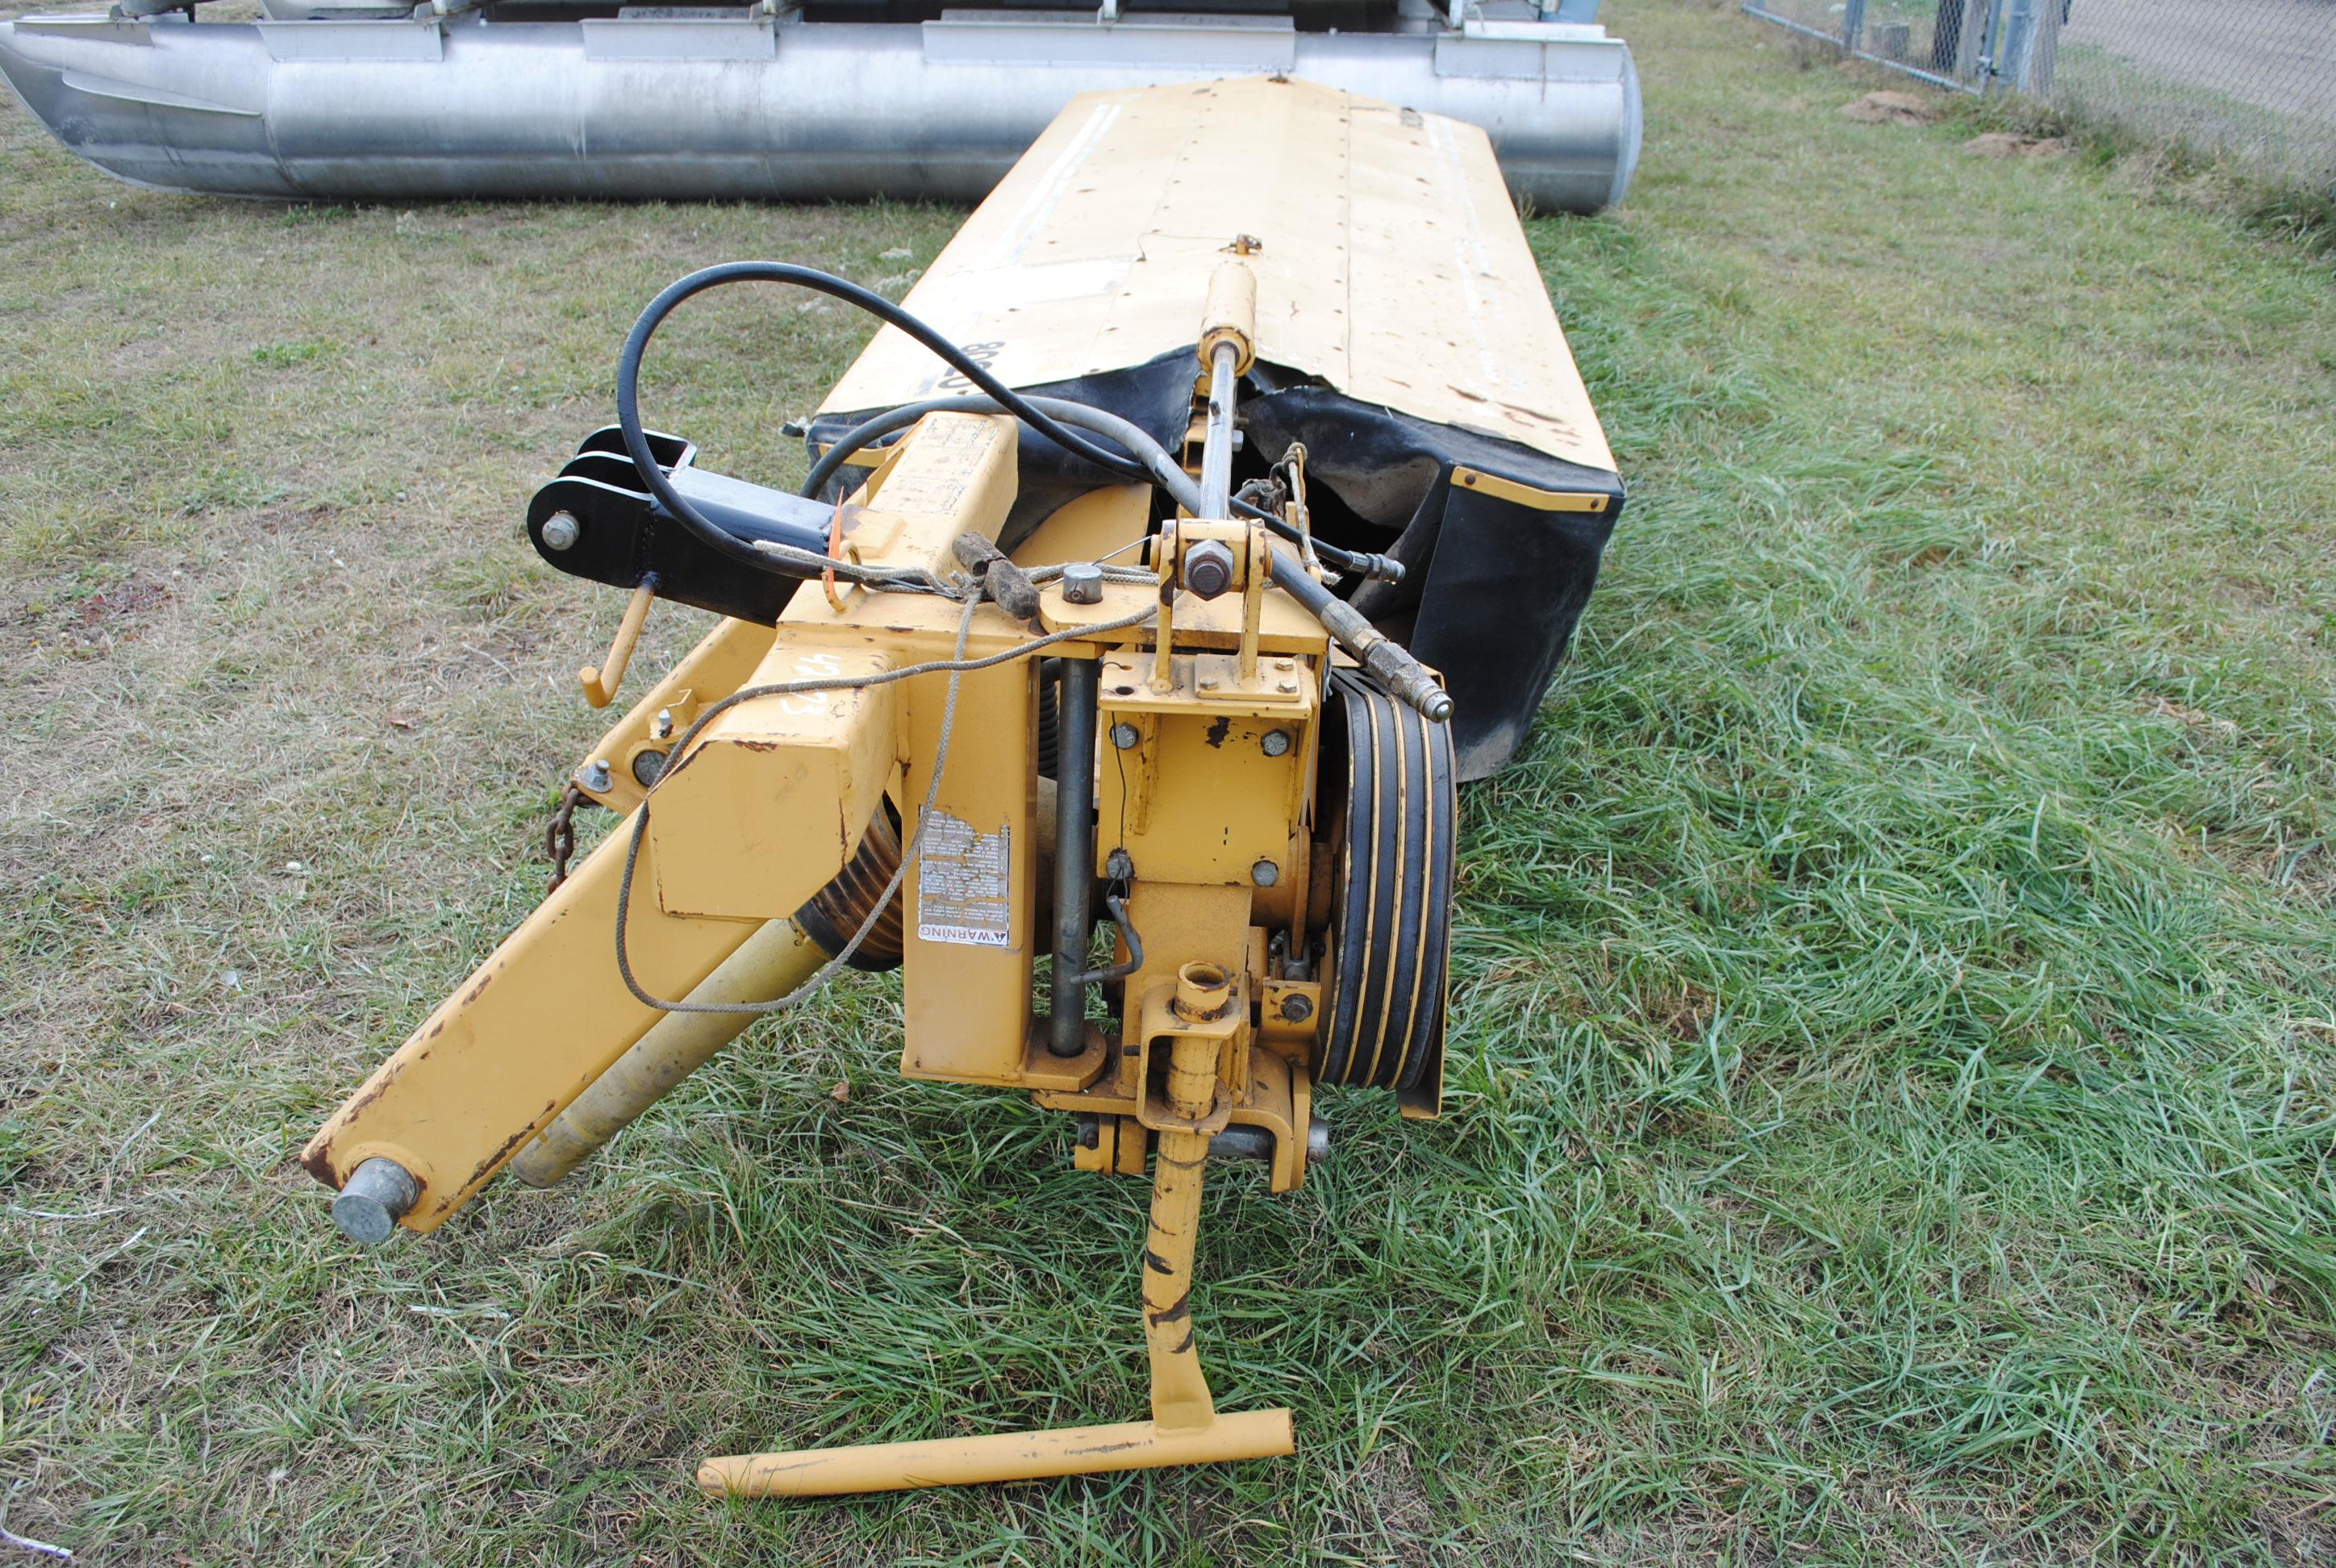 Vermeer 9' 8020 Disk Mower, owners manual & complete parts manual in office and 2 extra containers o